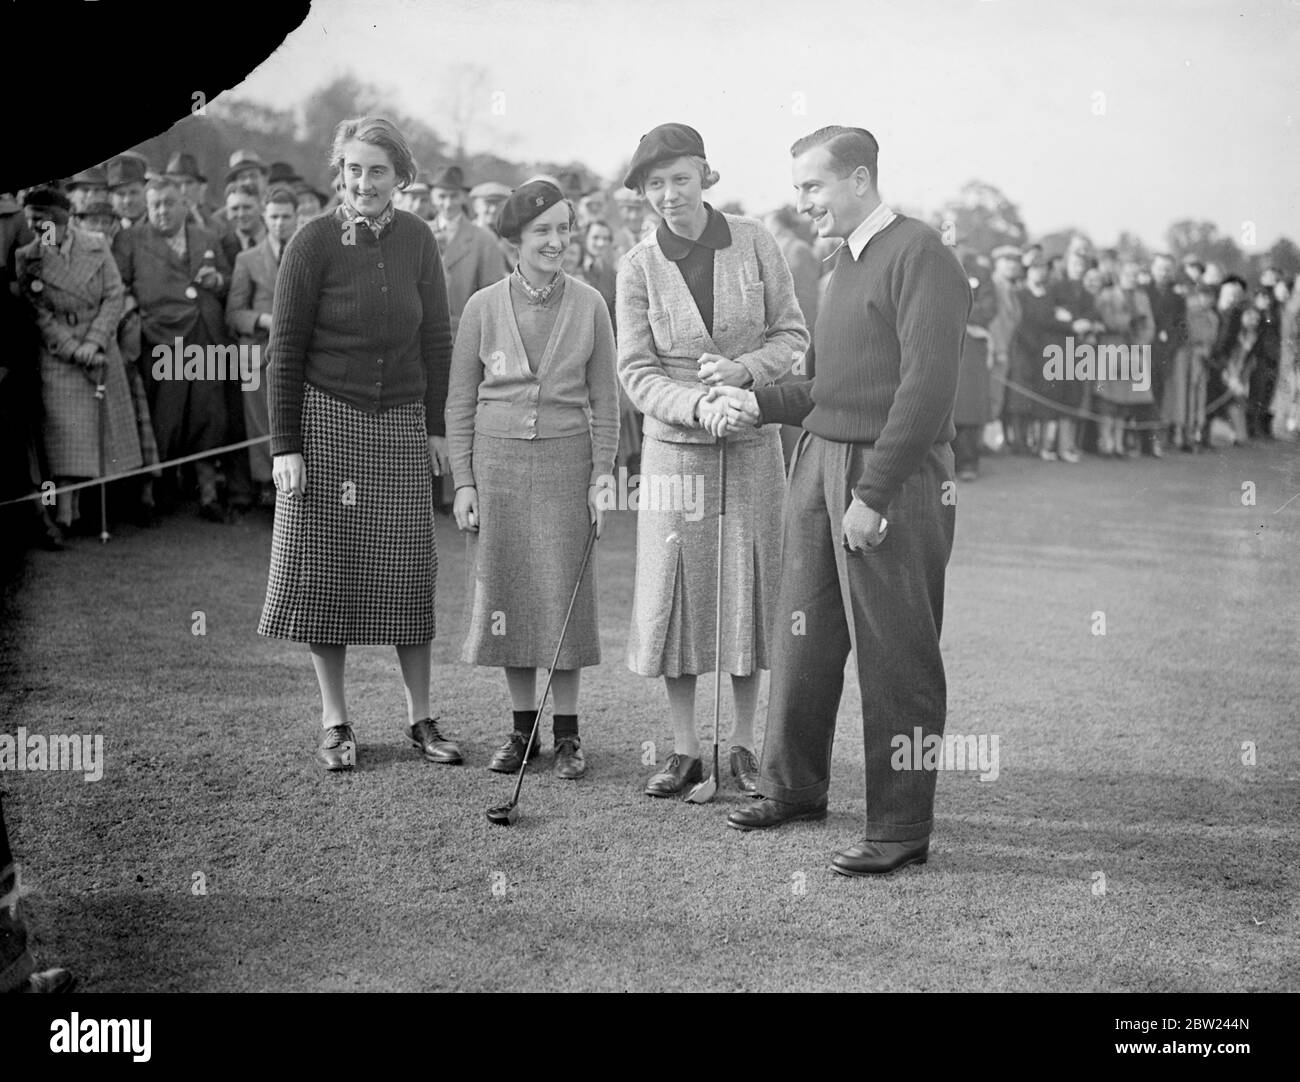 Henry Cotton, twice British Open champion and one of the world's leading professionals, matches his skills against three women golfers, who between them have won the British women's championship eight times, in a unique contest on the Maylands course at Romford, Essex. The match was over 18 holes, Cotton played the best ball of Joyce Wethered, Lady Heathcoat-Amory, Miss Enid Wilson, and Mme Rene Lacoste and, French champion eight times, who as Simone de la Chaume, won the British title in 1927. The women played level with Cotton, receiving no advantage, even driving from the same teeing ground Stock Photo